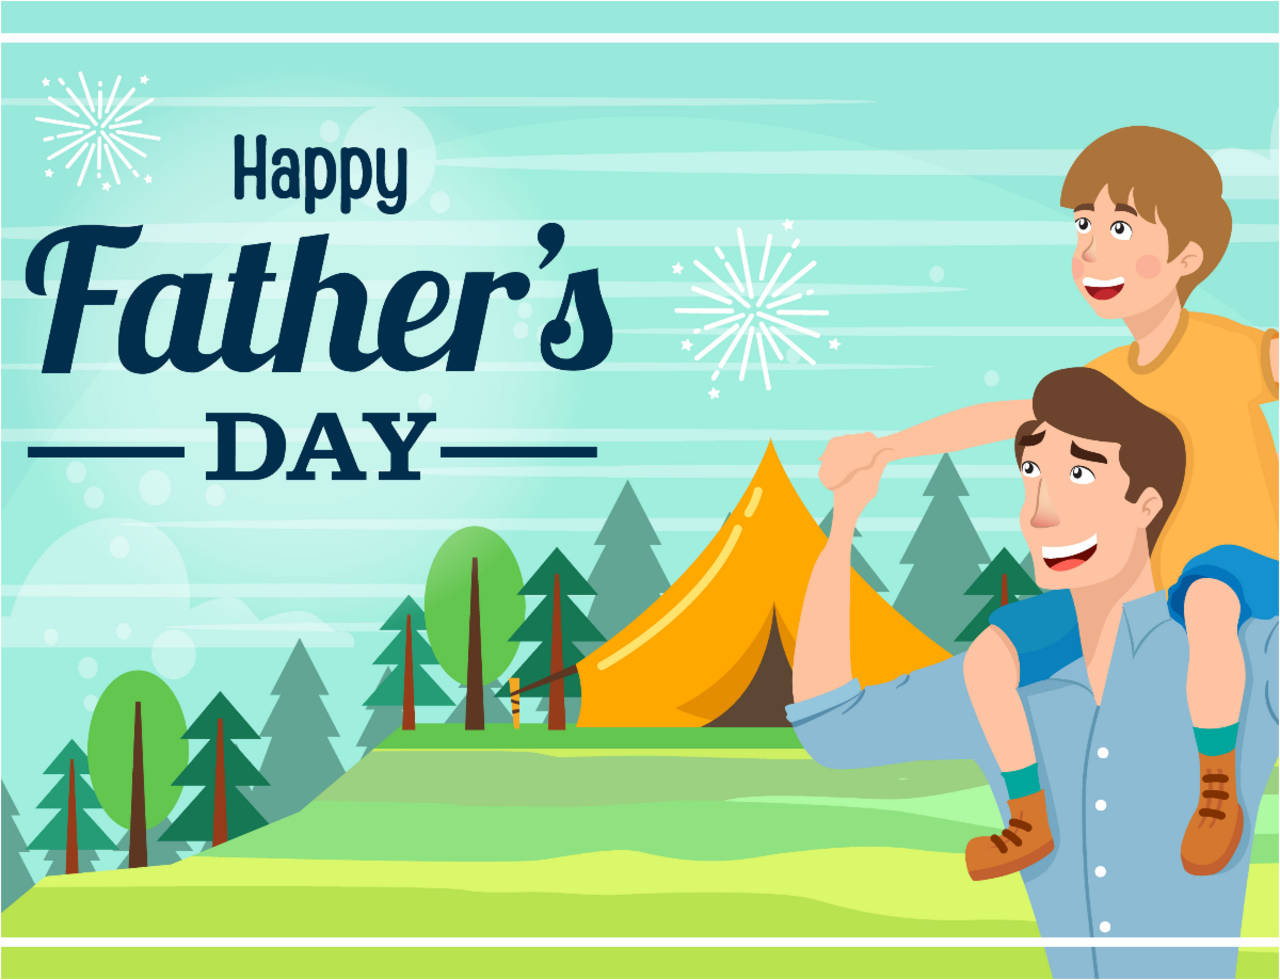 Father's Day Blessings Images: Celebrate Dad with These Heartfelt ...